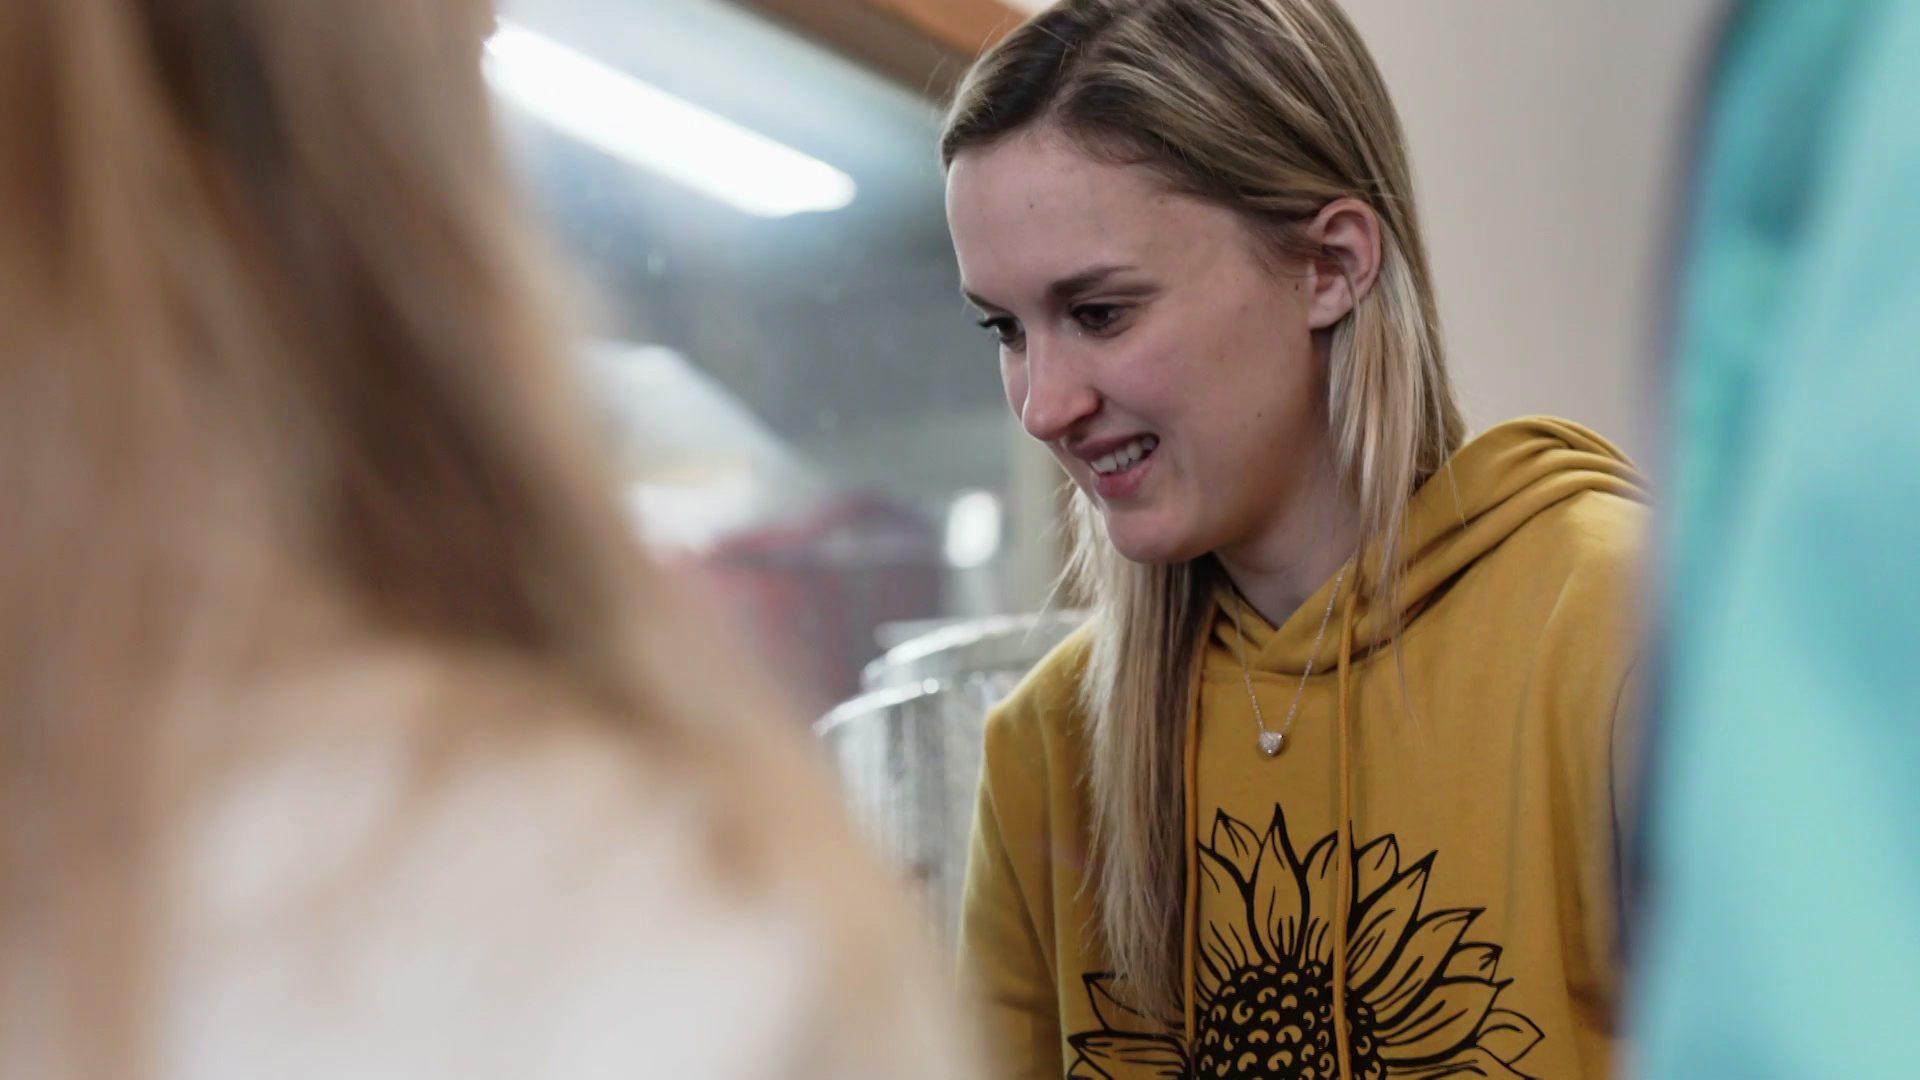 A woman wearing a yellow sweatshirt with a sunflower on it speaks with a customer